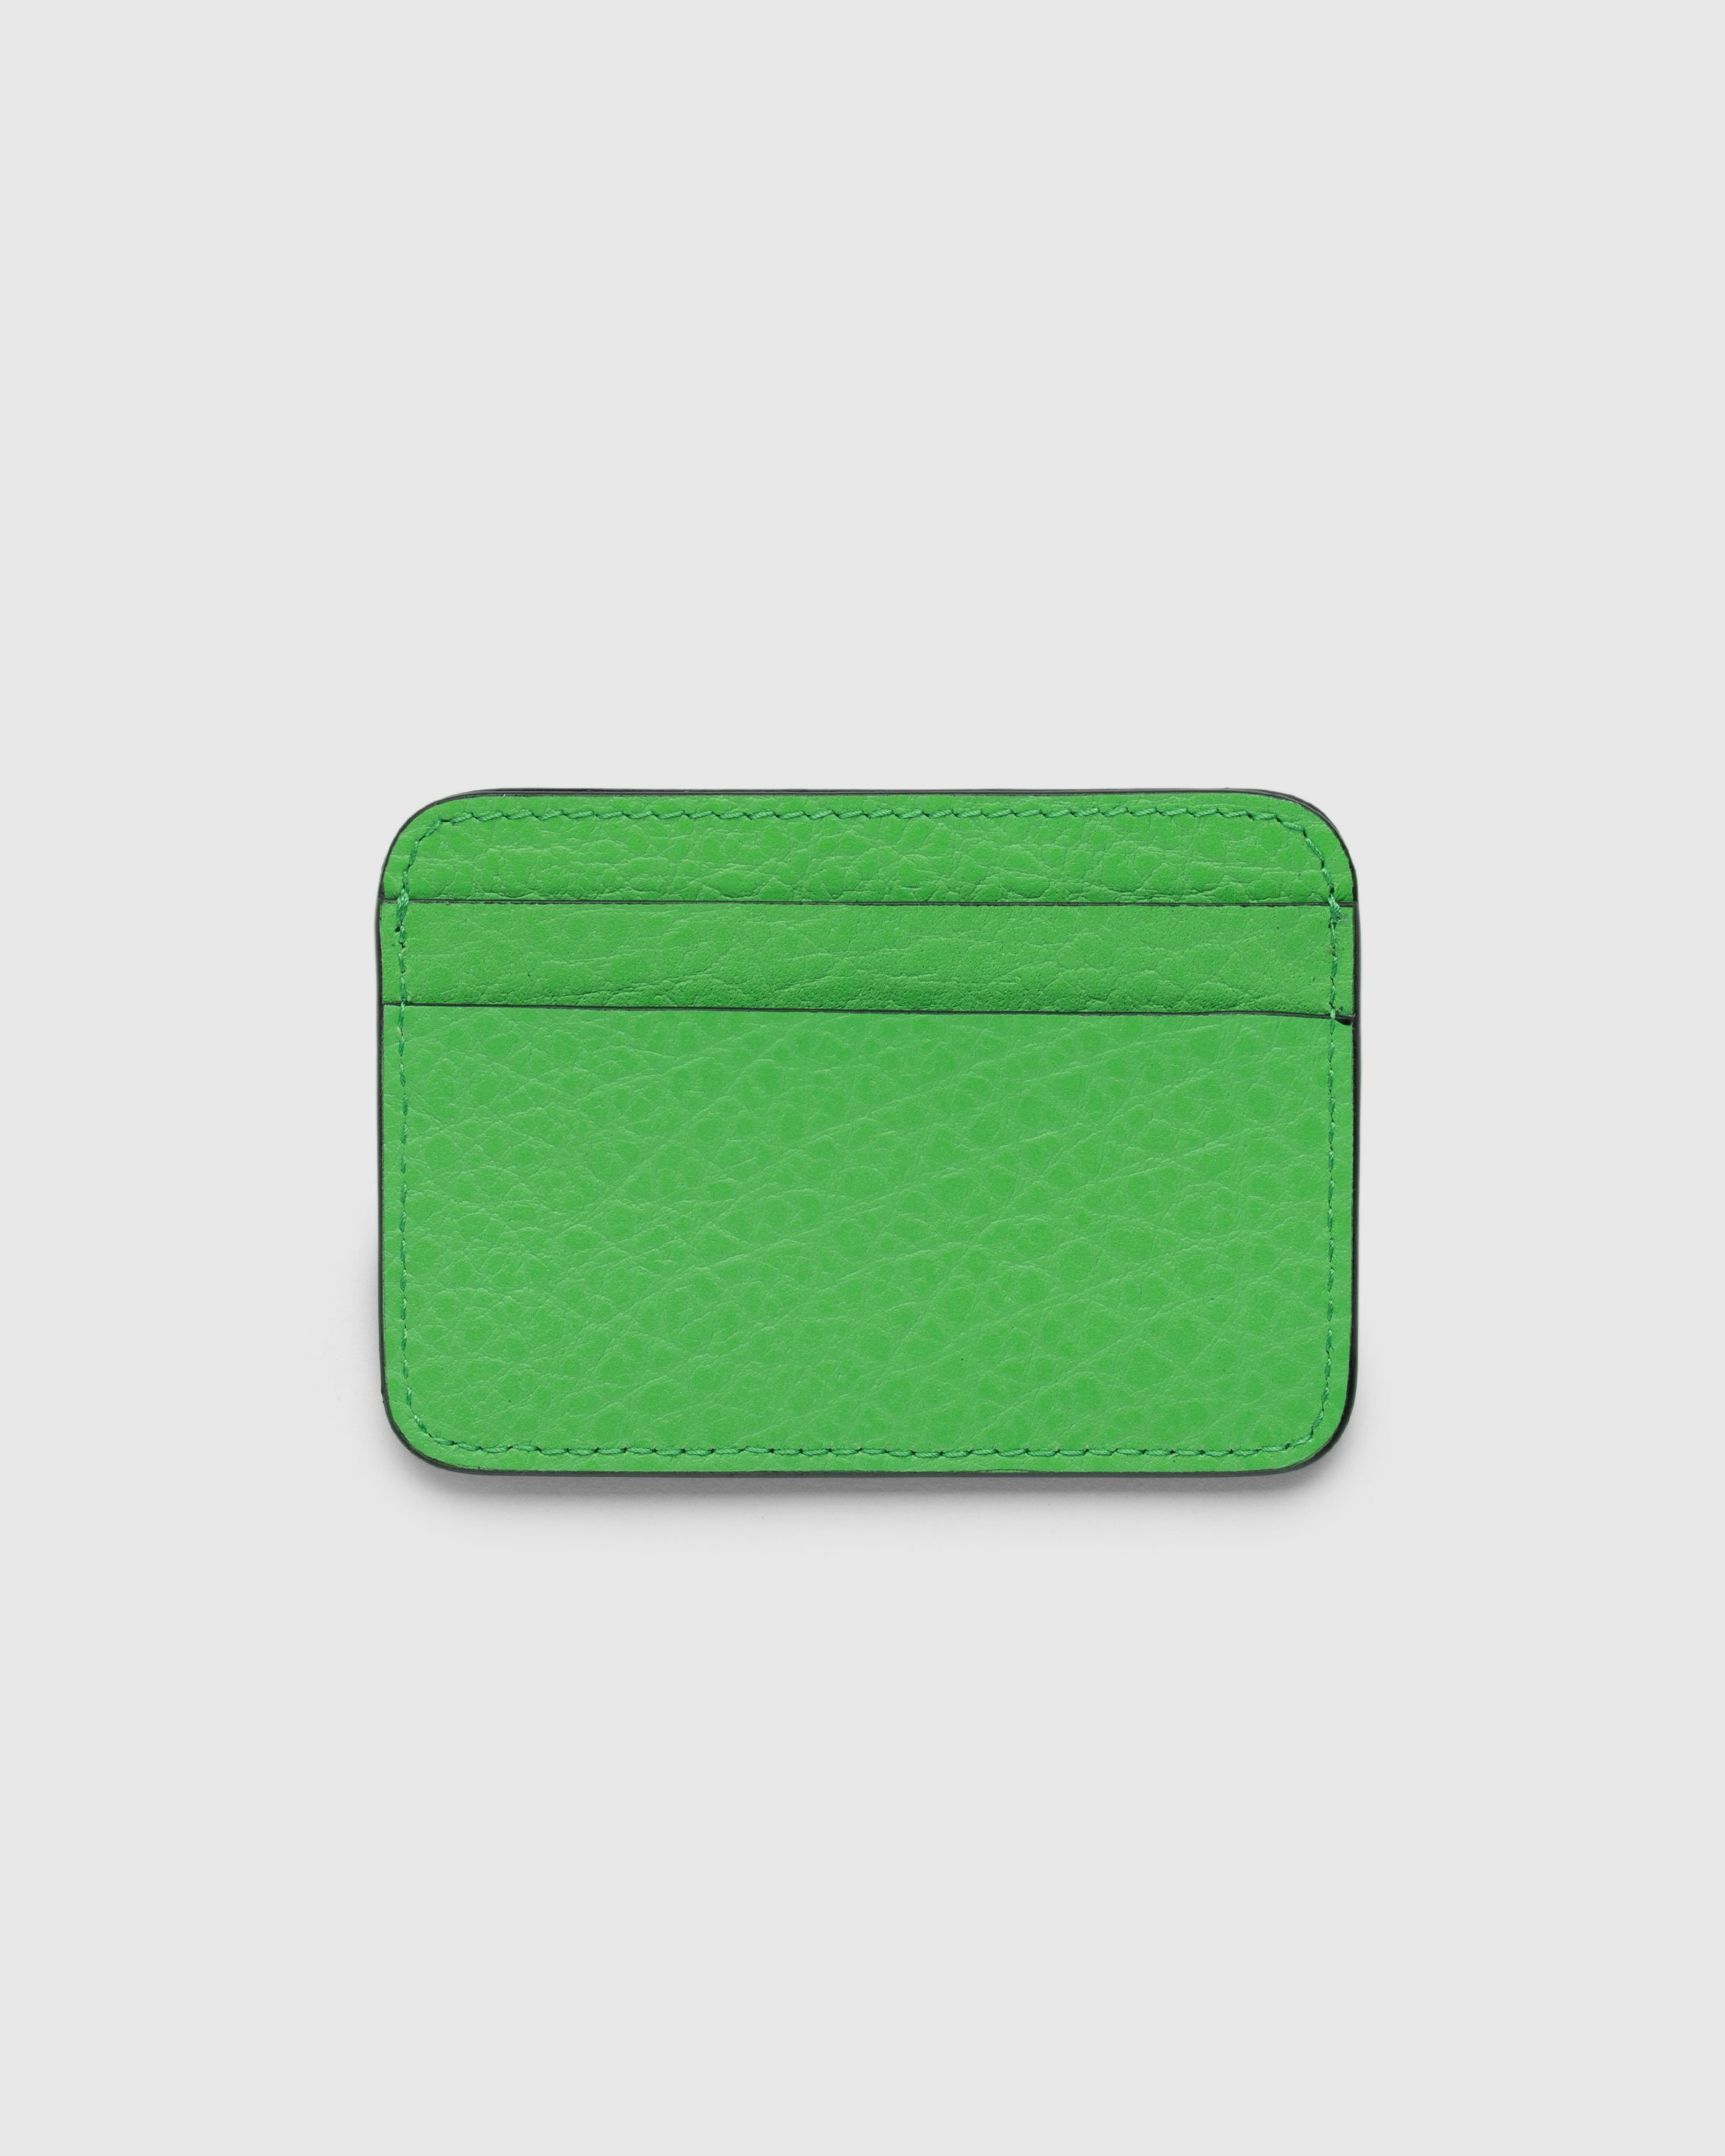 Acne Studios - FN-UX-SLGS000275 GREEN - Accessories - Green - Image 2